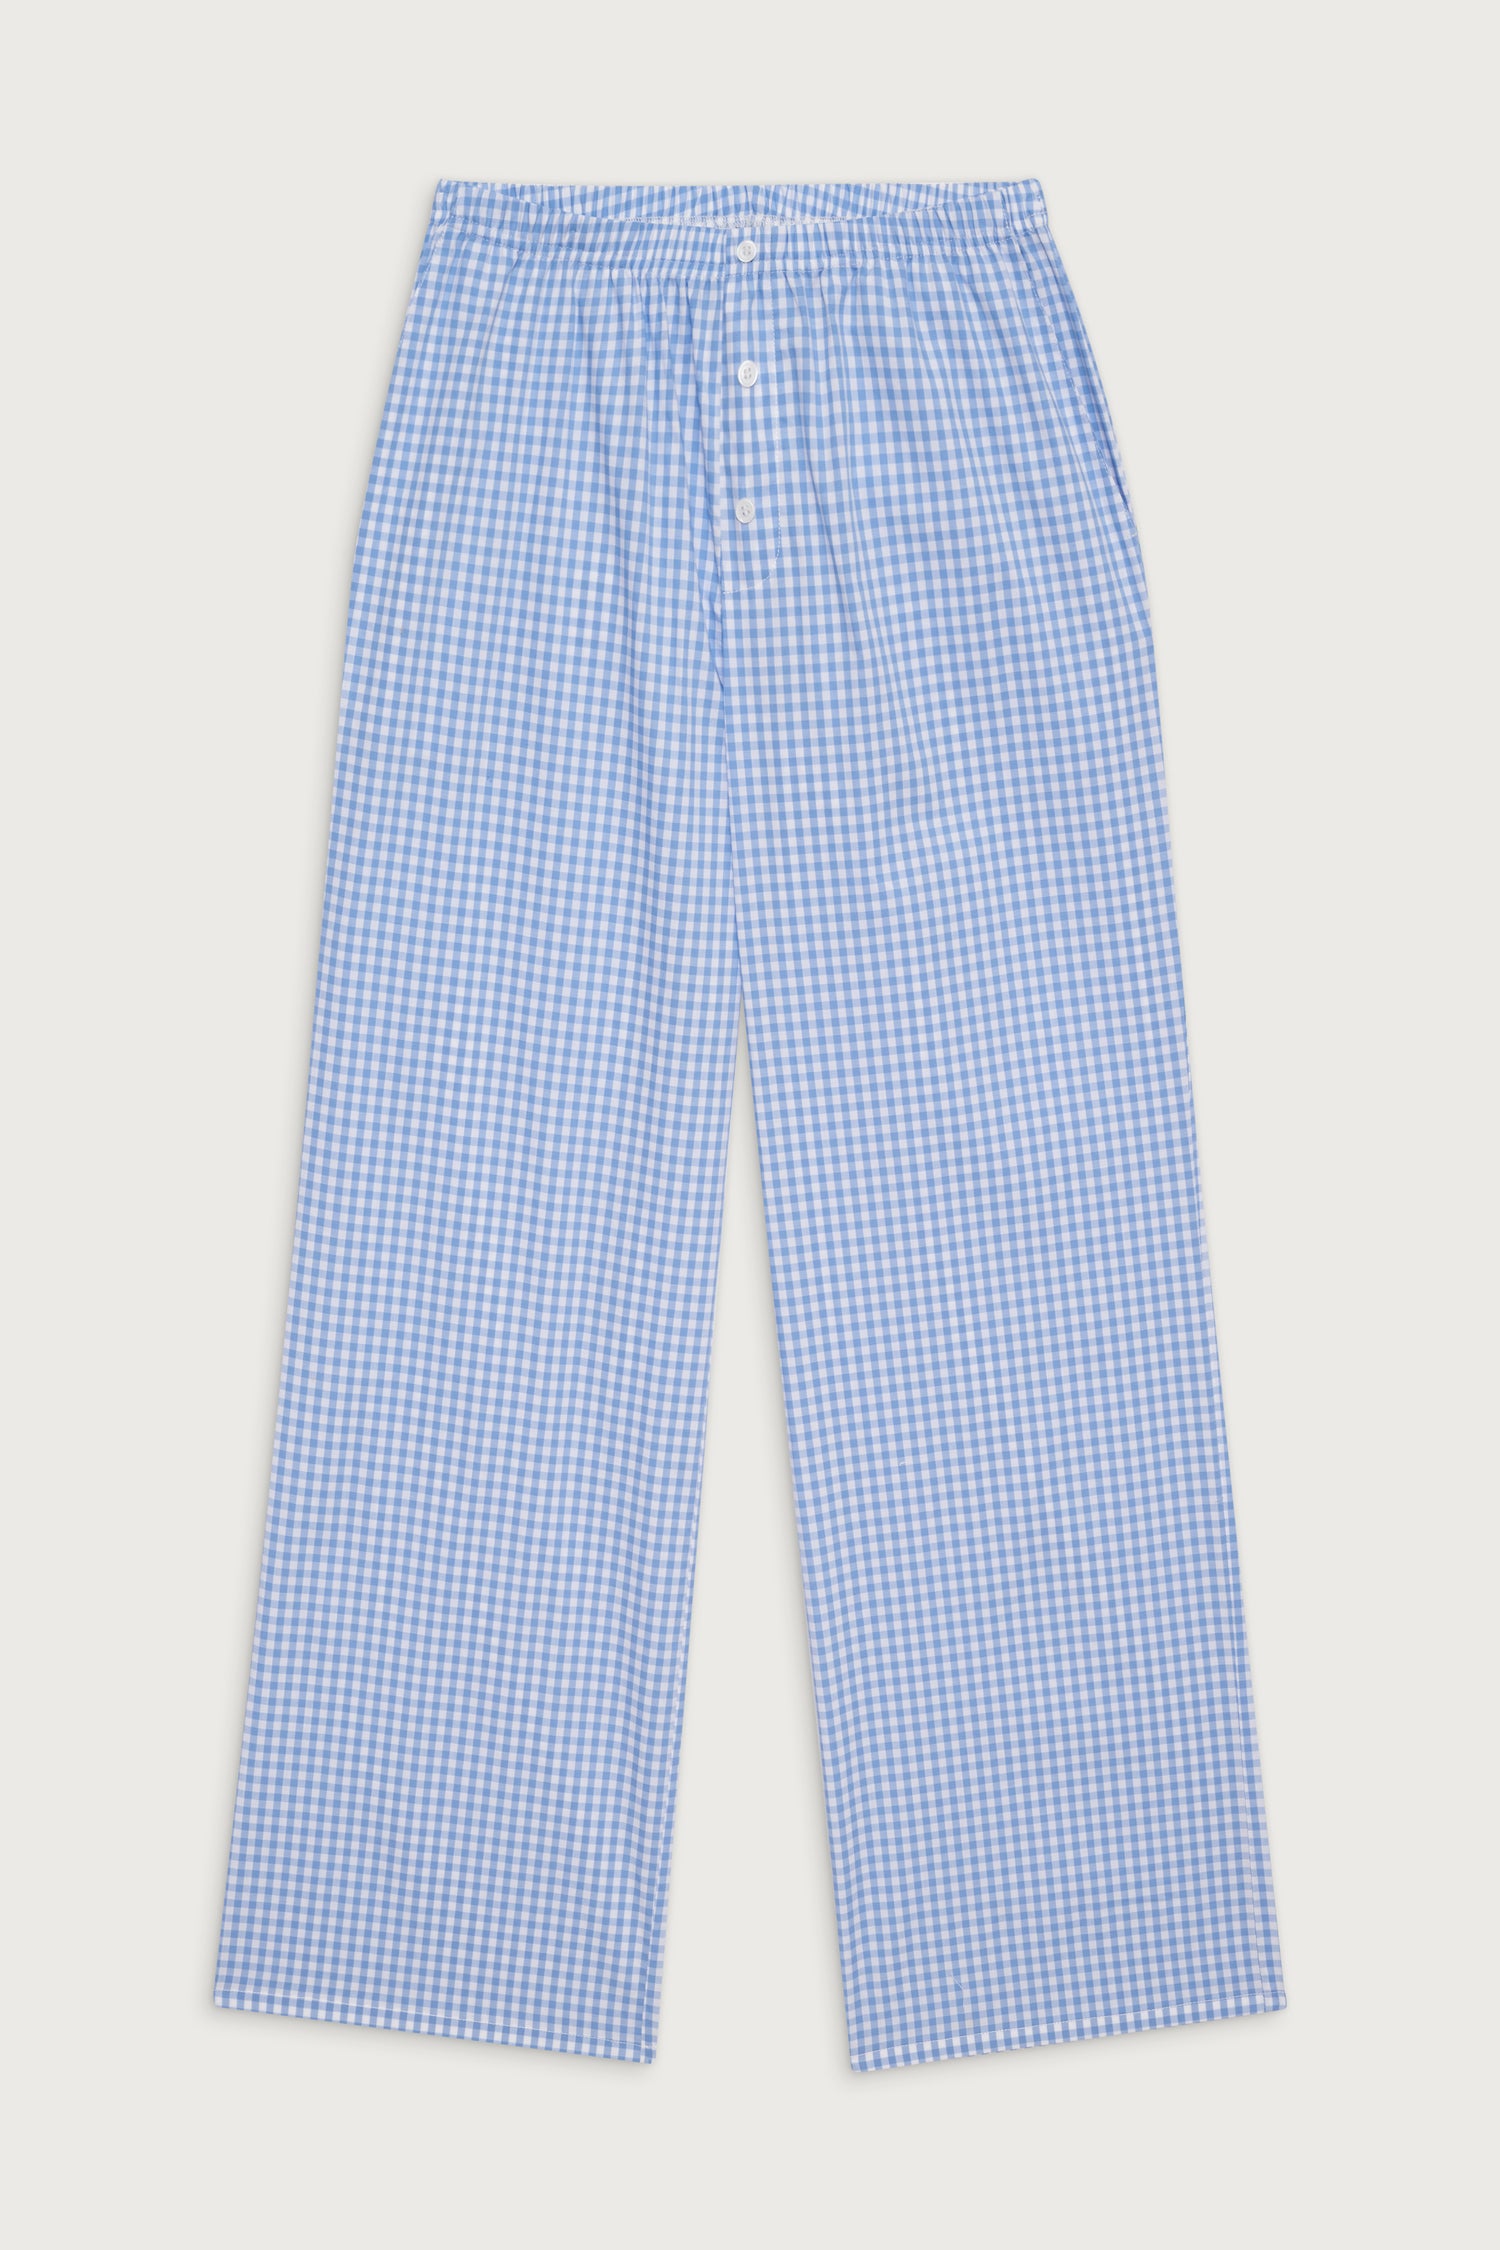 Raleigh Cotton Pant - Cloud Gingham